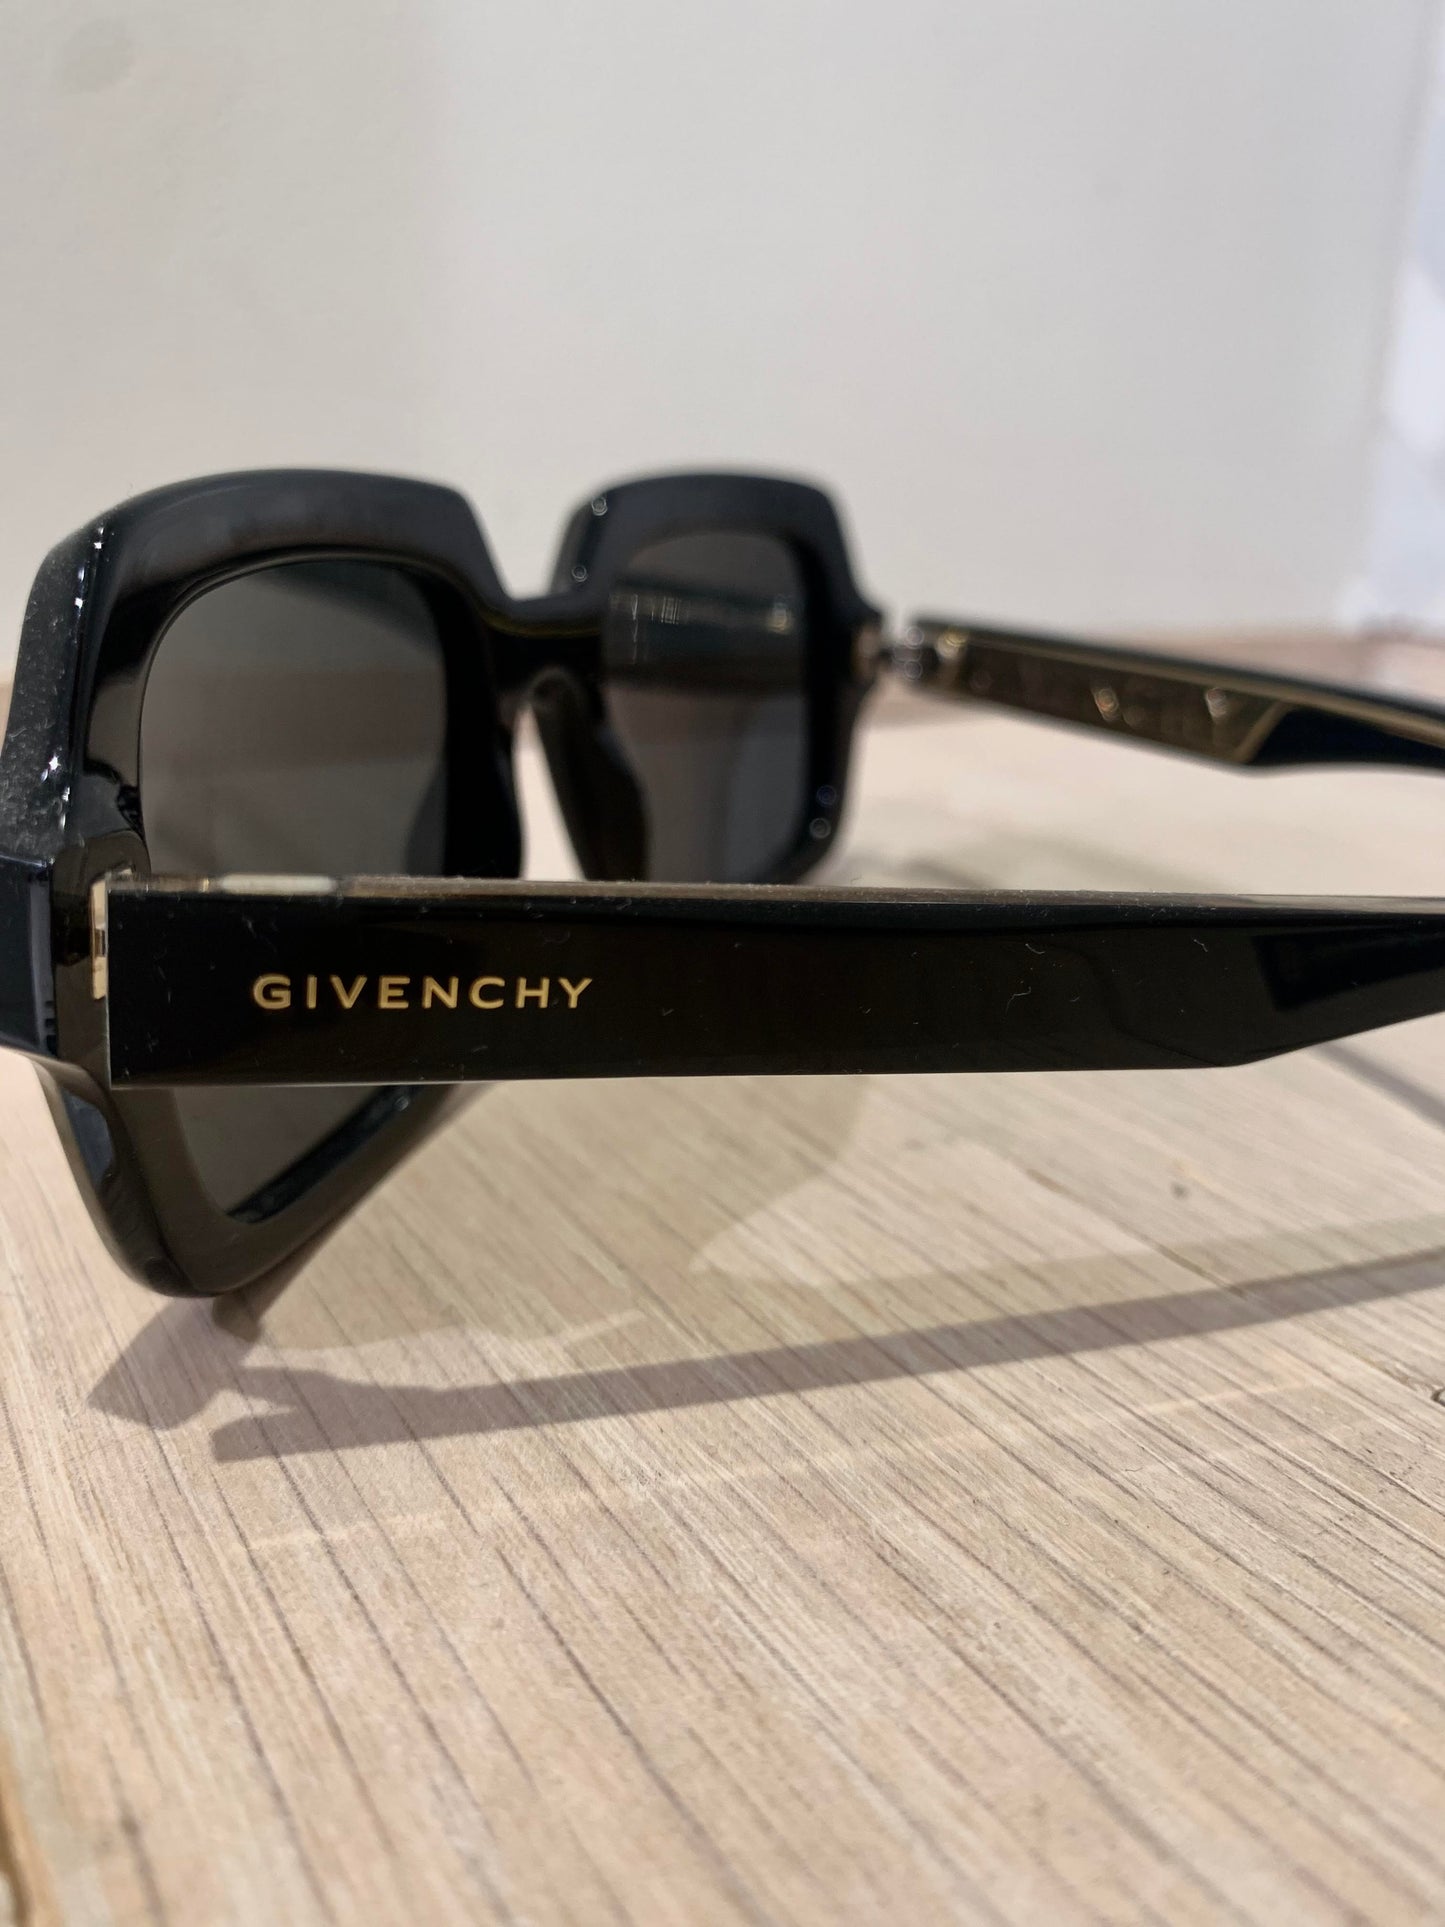 GIVENCHY - SUNGLASSES - SQUARE (3 COLORS)